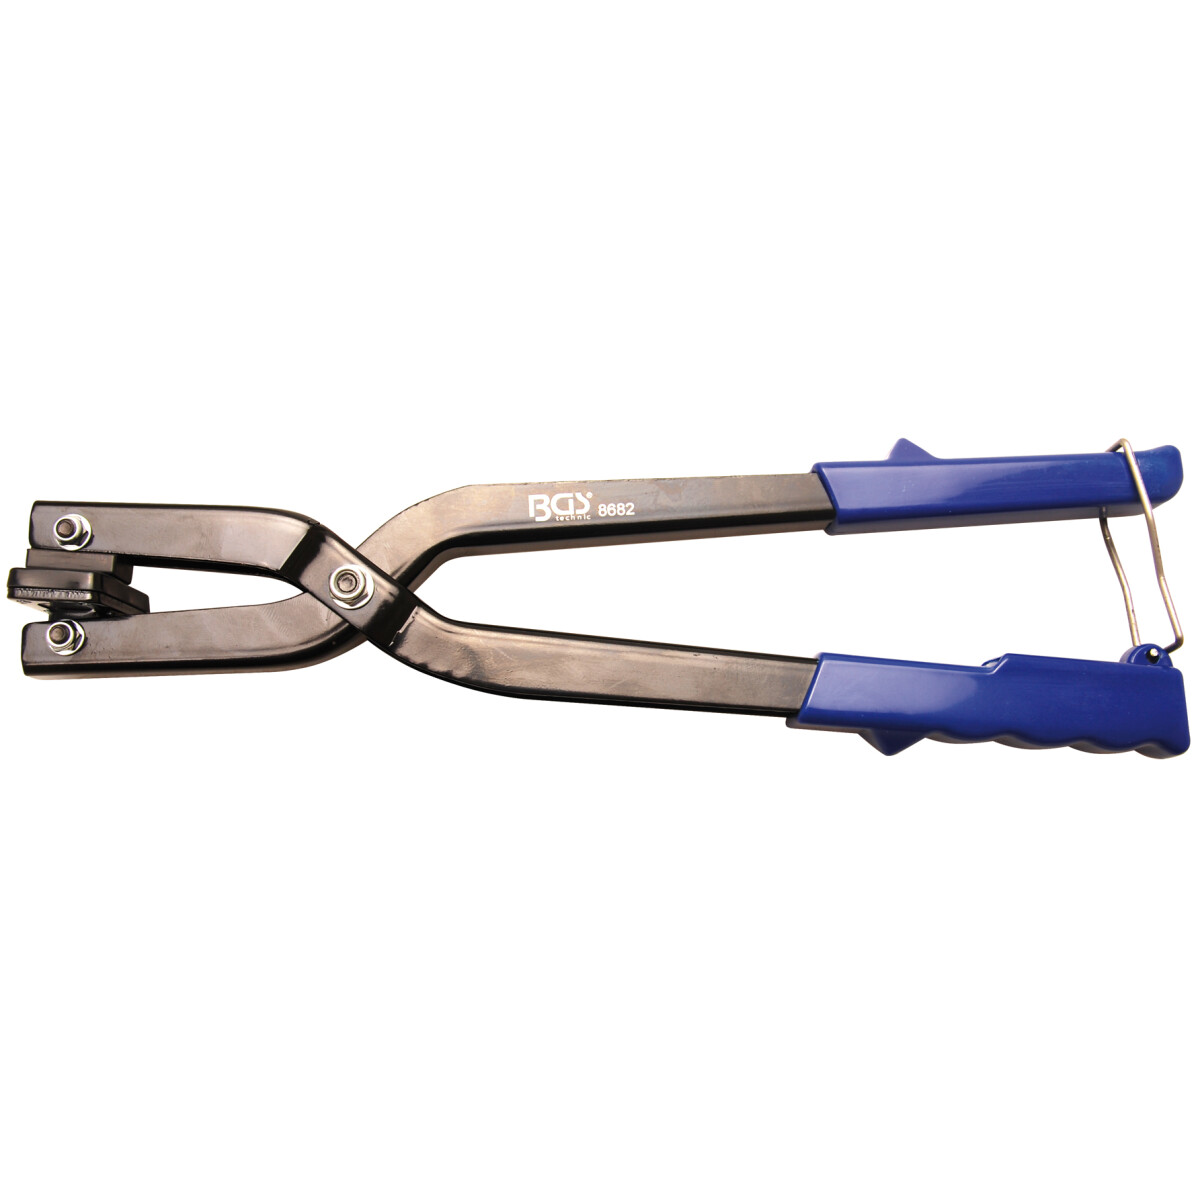 BGS Cycle and Fender Crimp Pliers | 310 mm (BGS 8682)